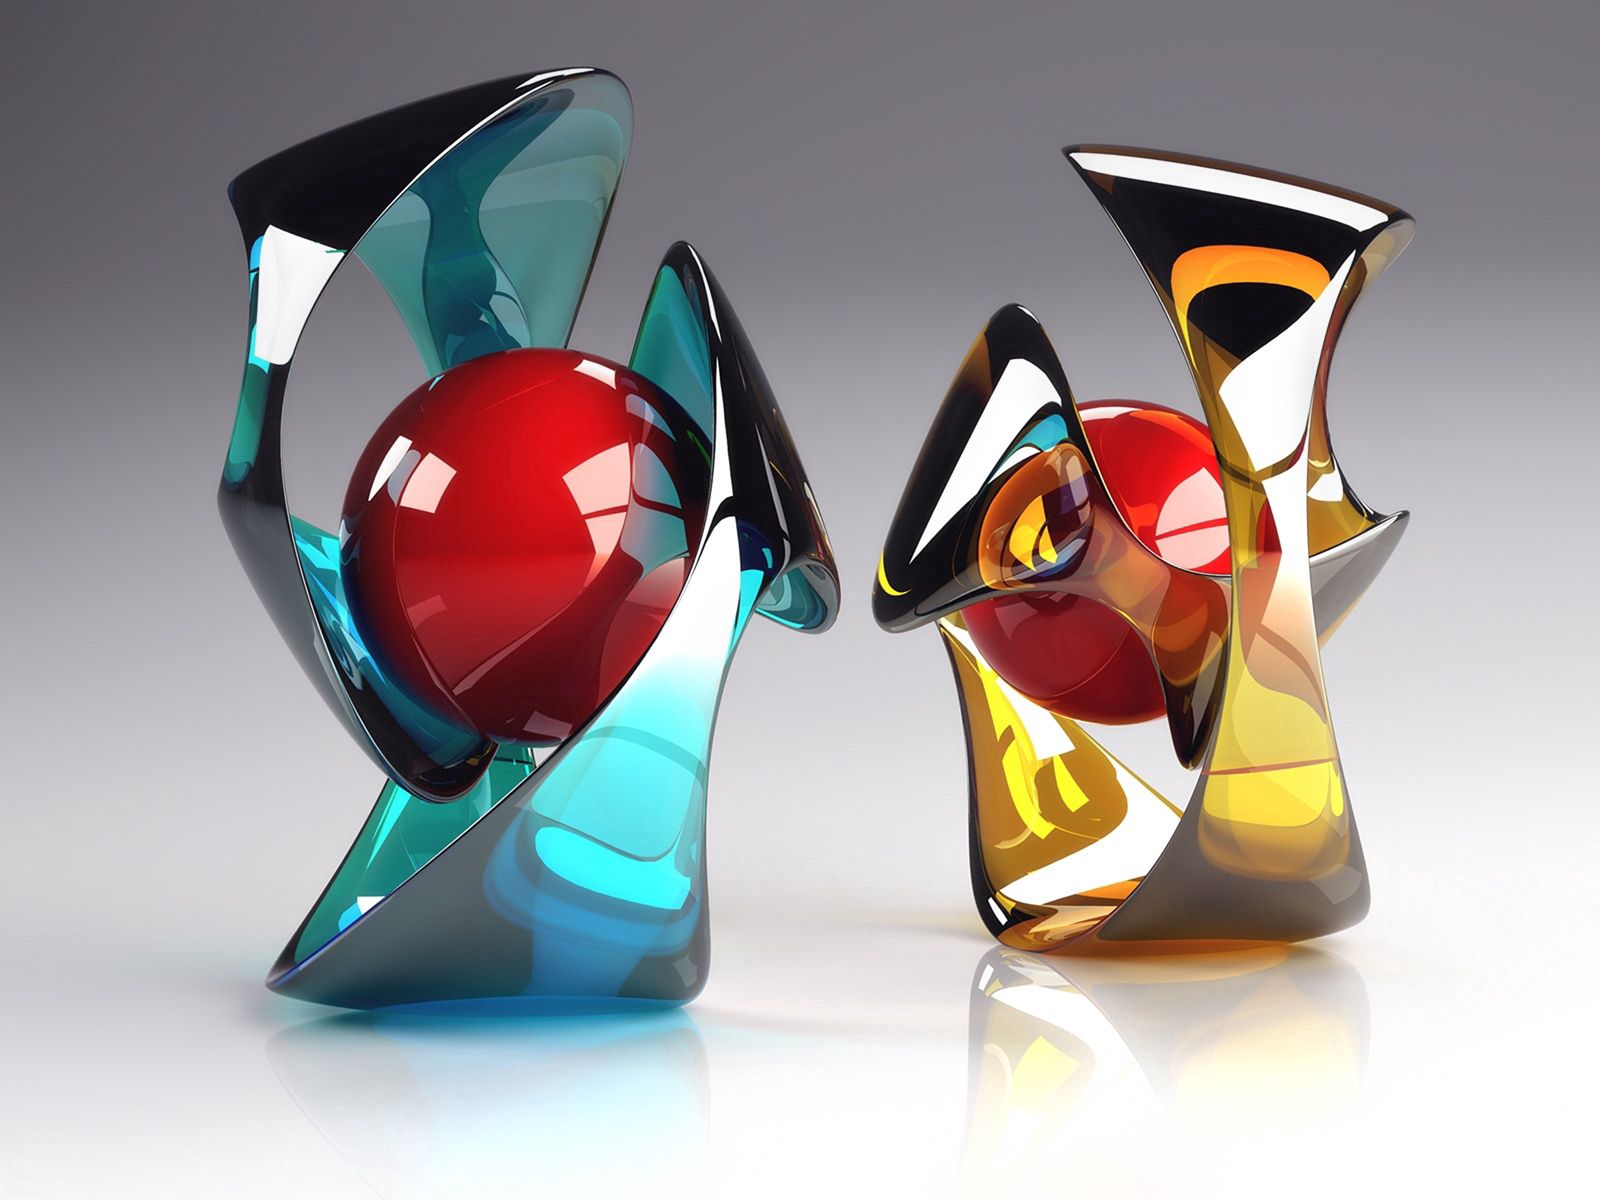 shape, colourful, 3d, glass, ball, colorful, shapes